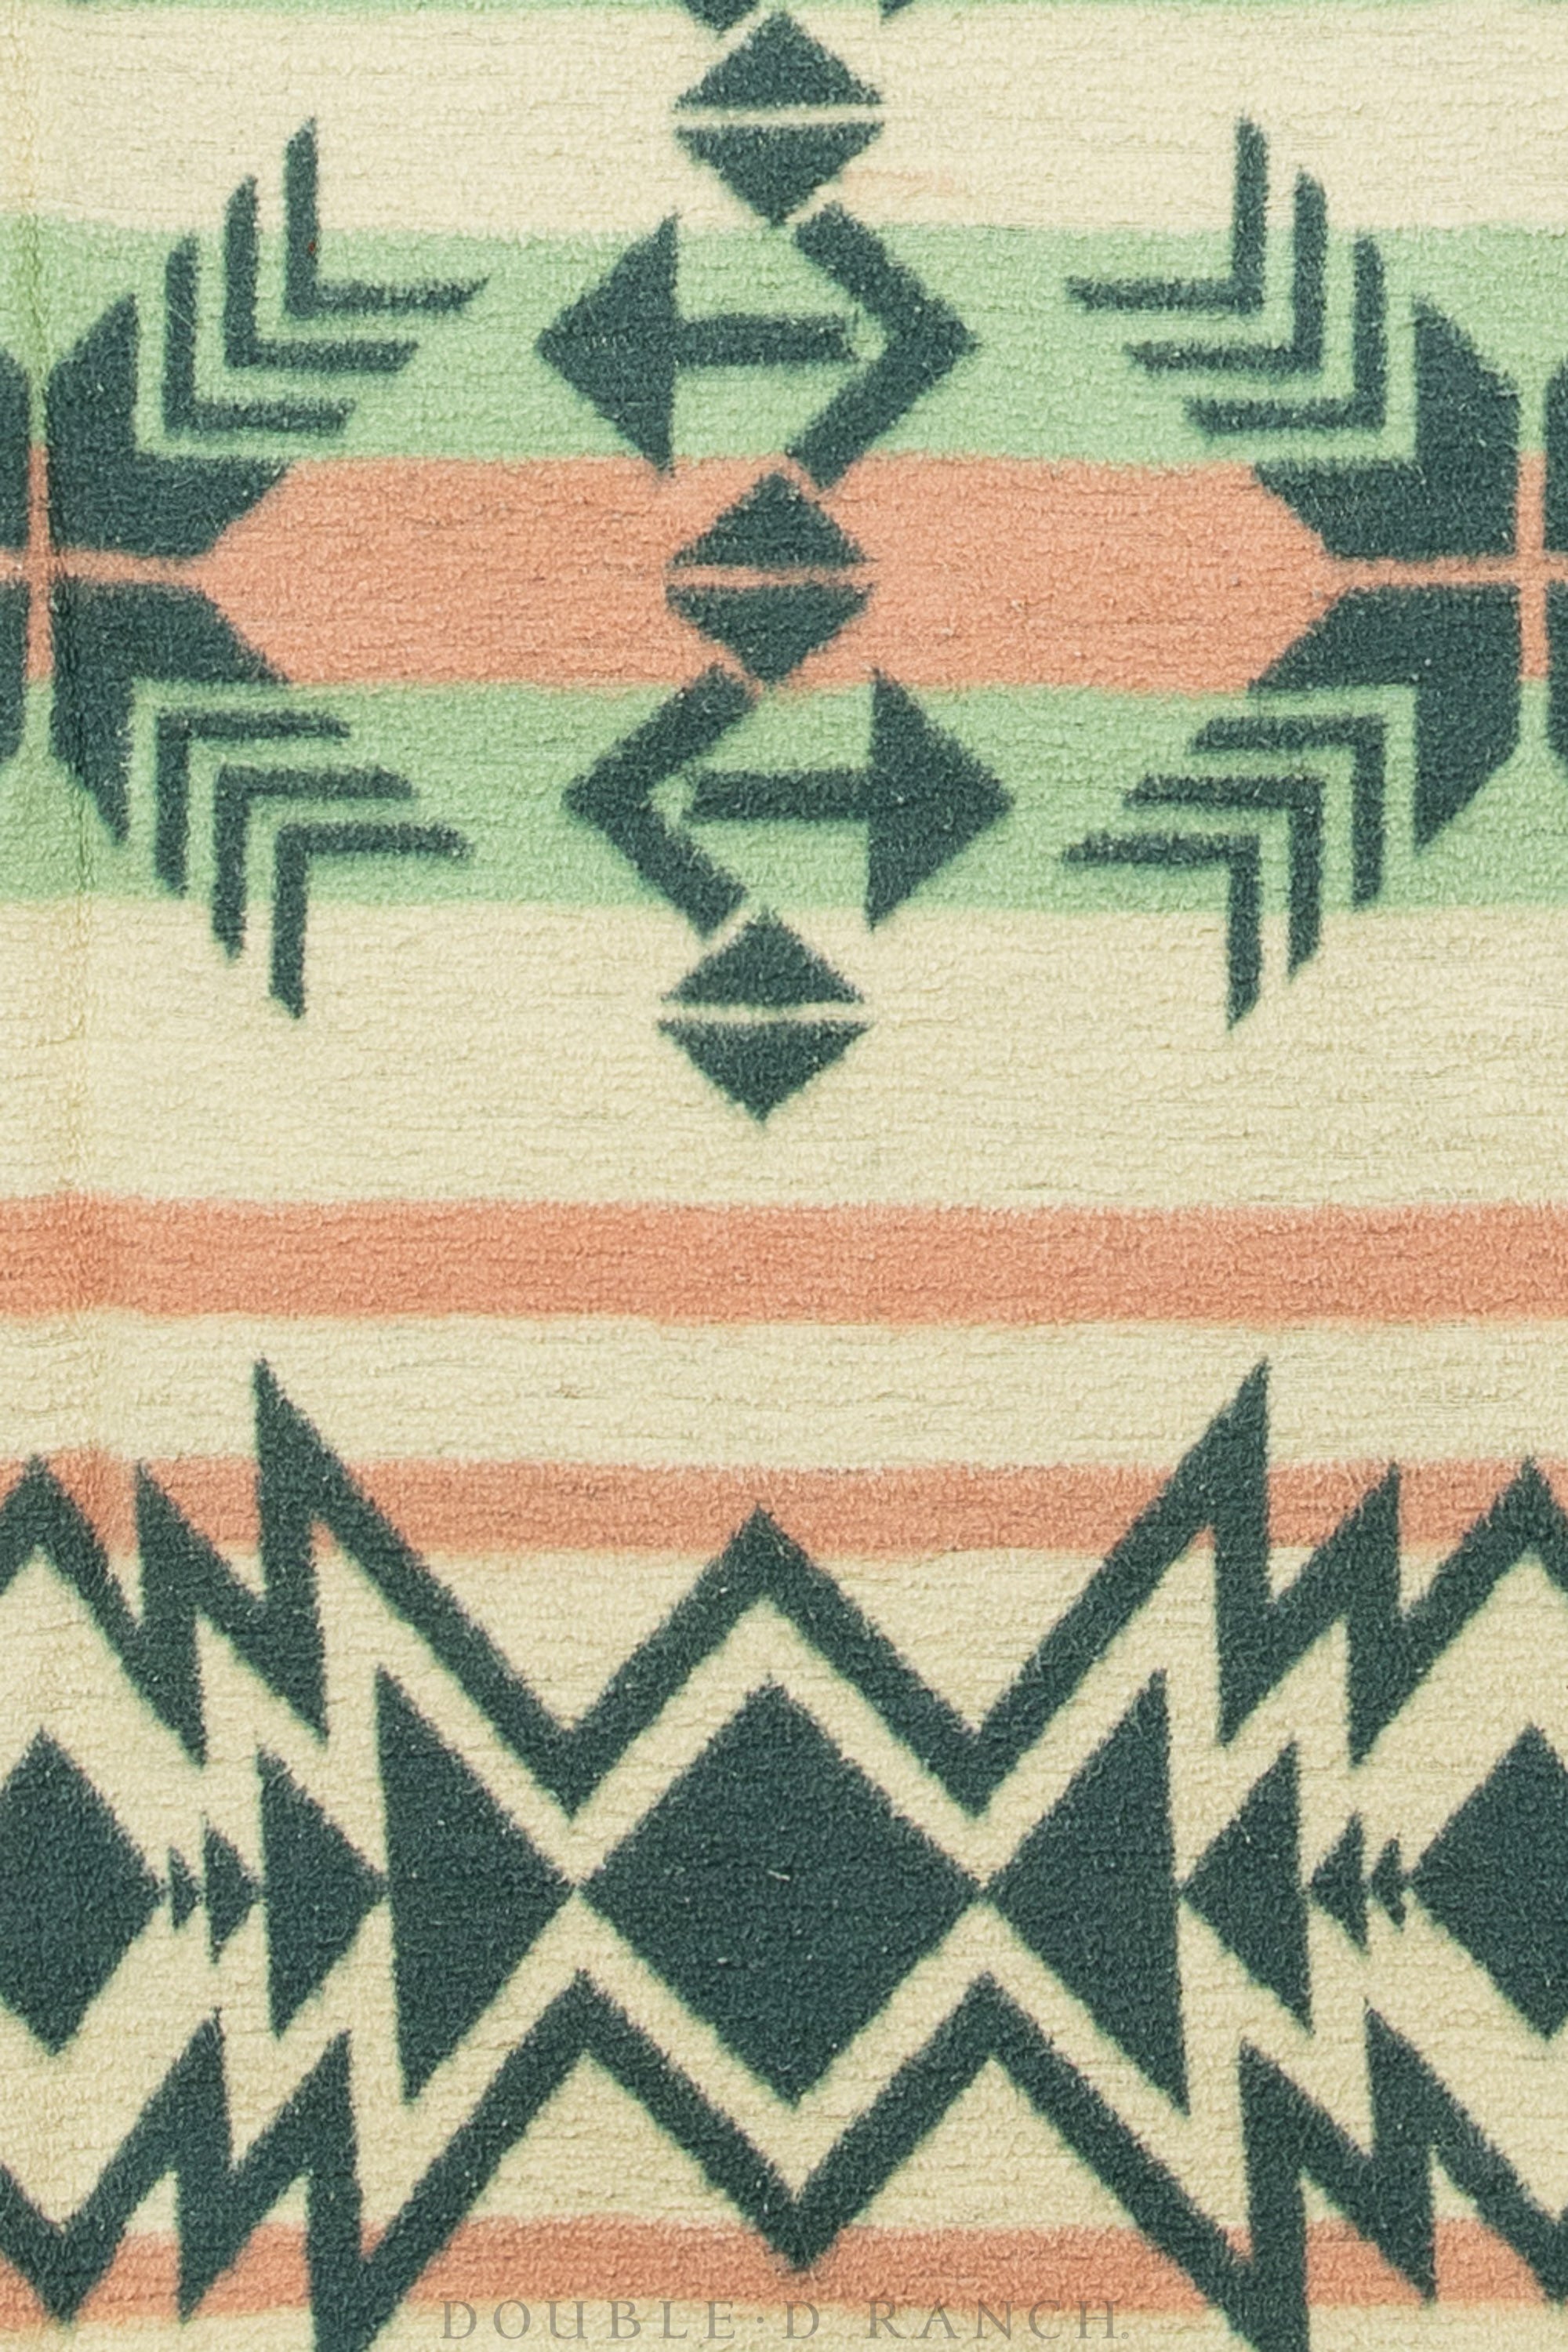 Home, Textile, Camp Blanket, Beacon, Forest & Peach, Vintage,107